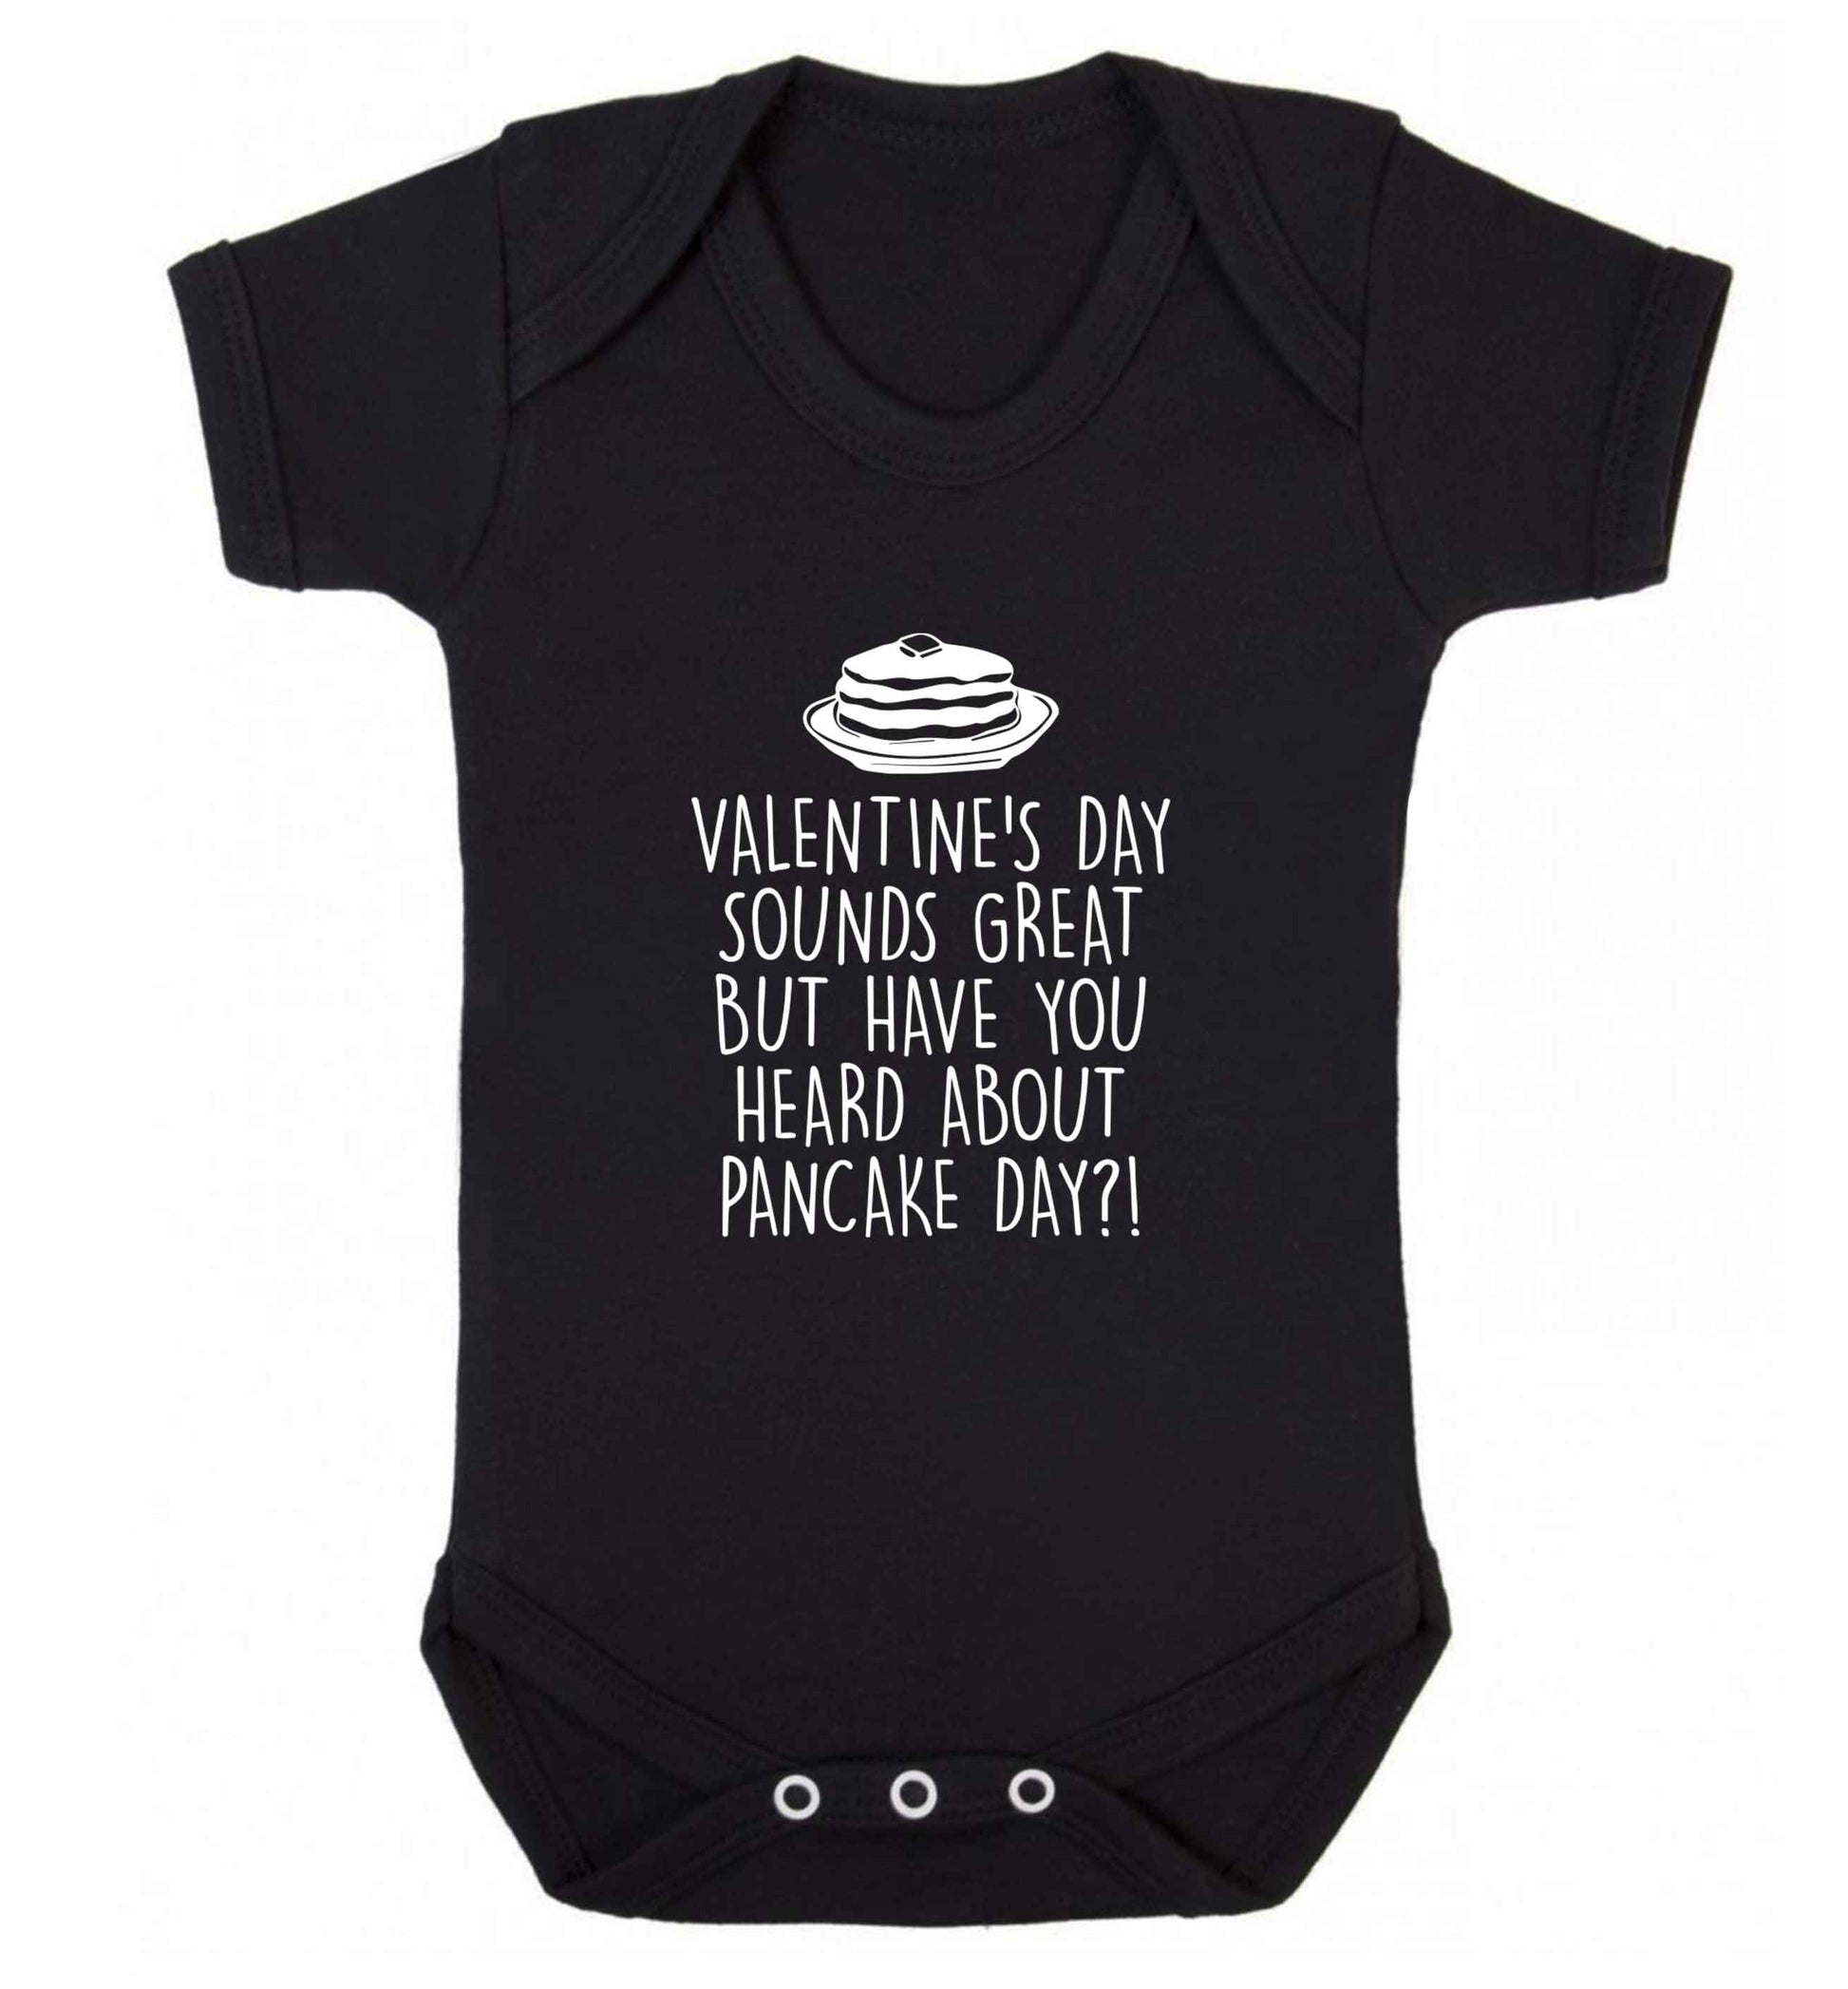 Valentine's day sounds great but have you heard about pancake day?! baby vest black 18-24 months